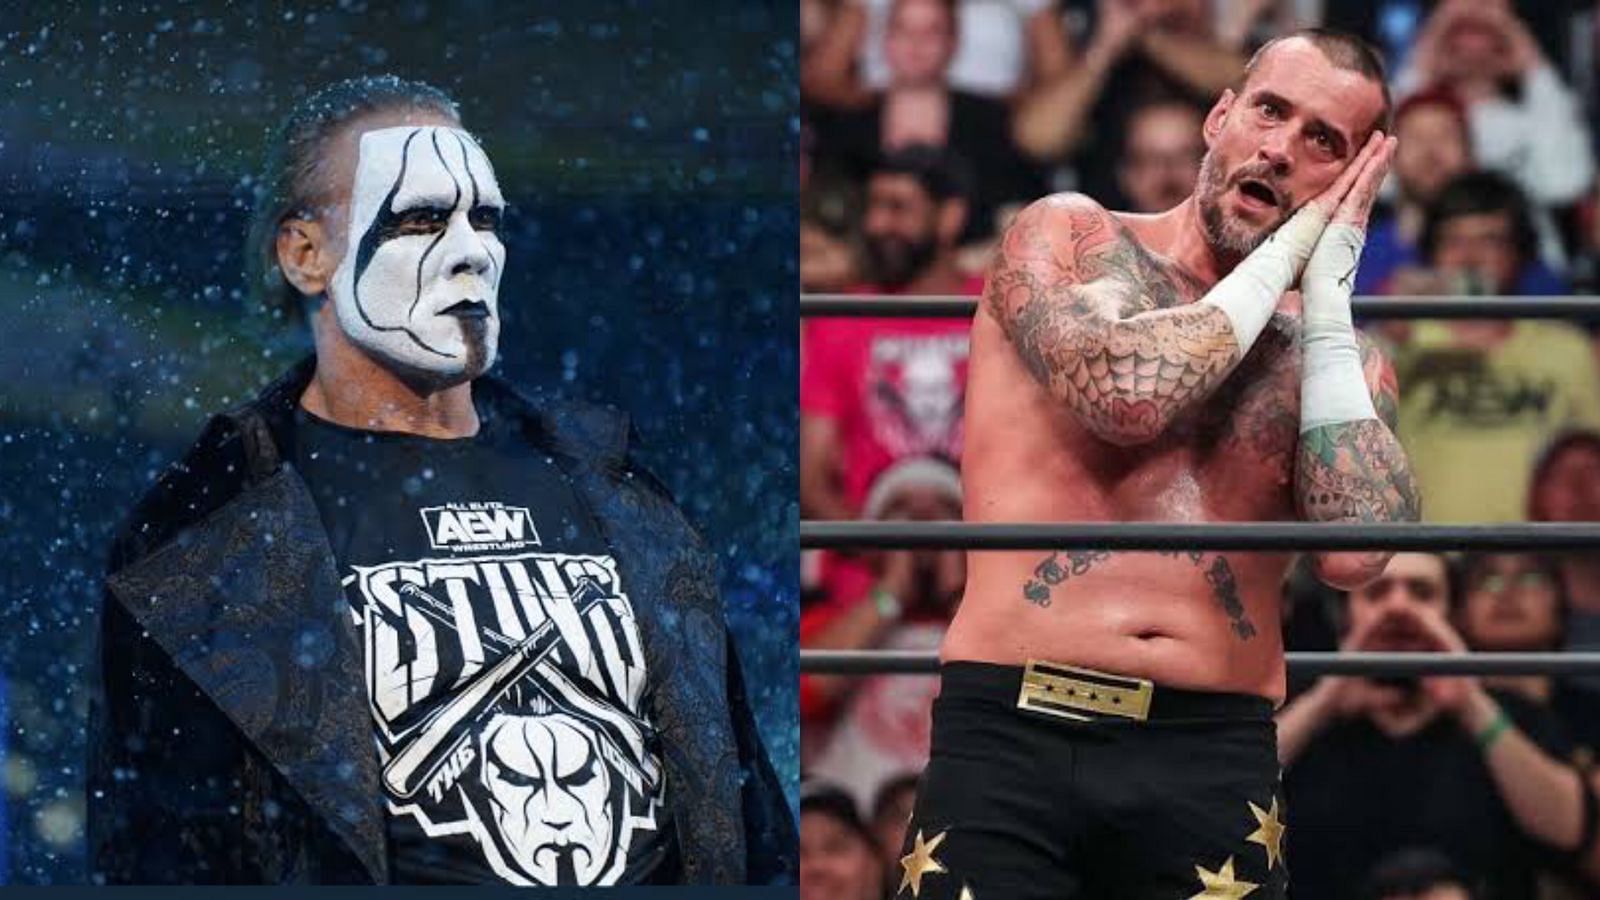 Sting prayed for him before his match against CM Punk says AEW star